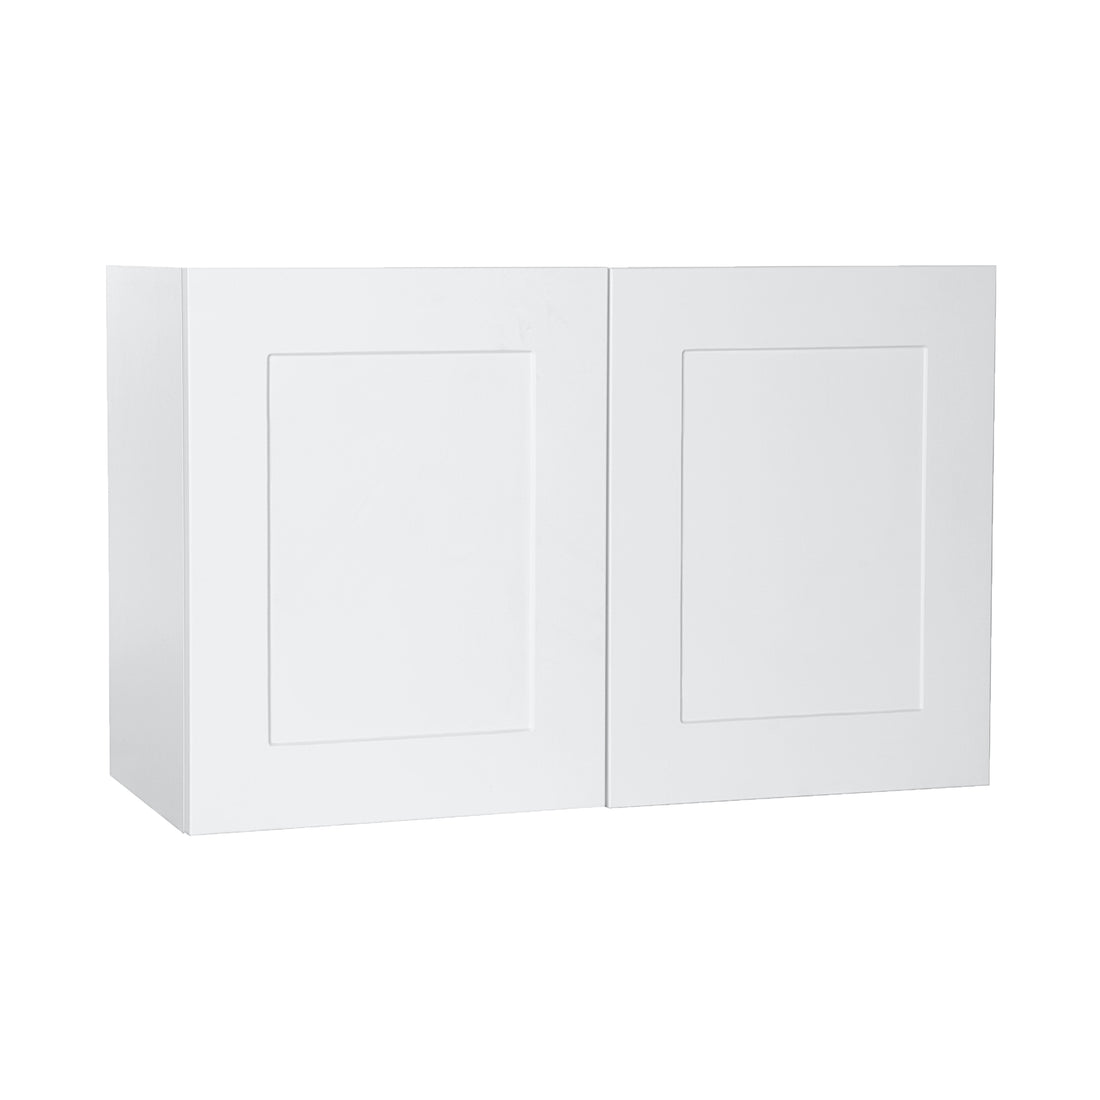 Quick Assemble Modern Style with Soft Close, White Shaker Wall Bridge Kitchen Cabinet (36 in W x 18 in H x 12 in D) -  Pro-Edge HD